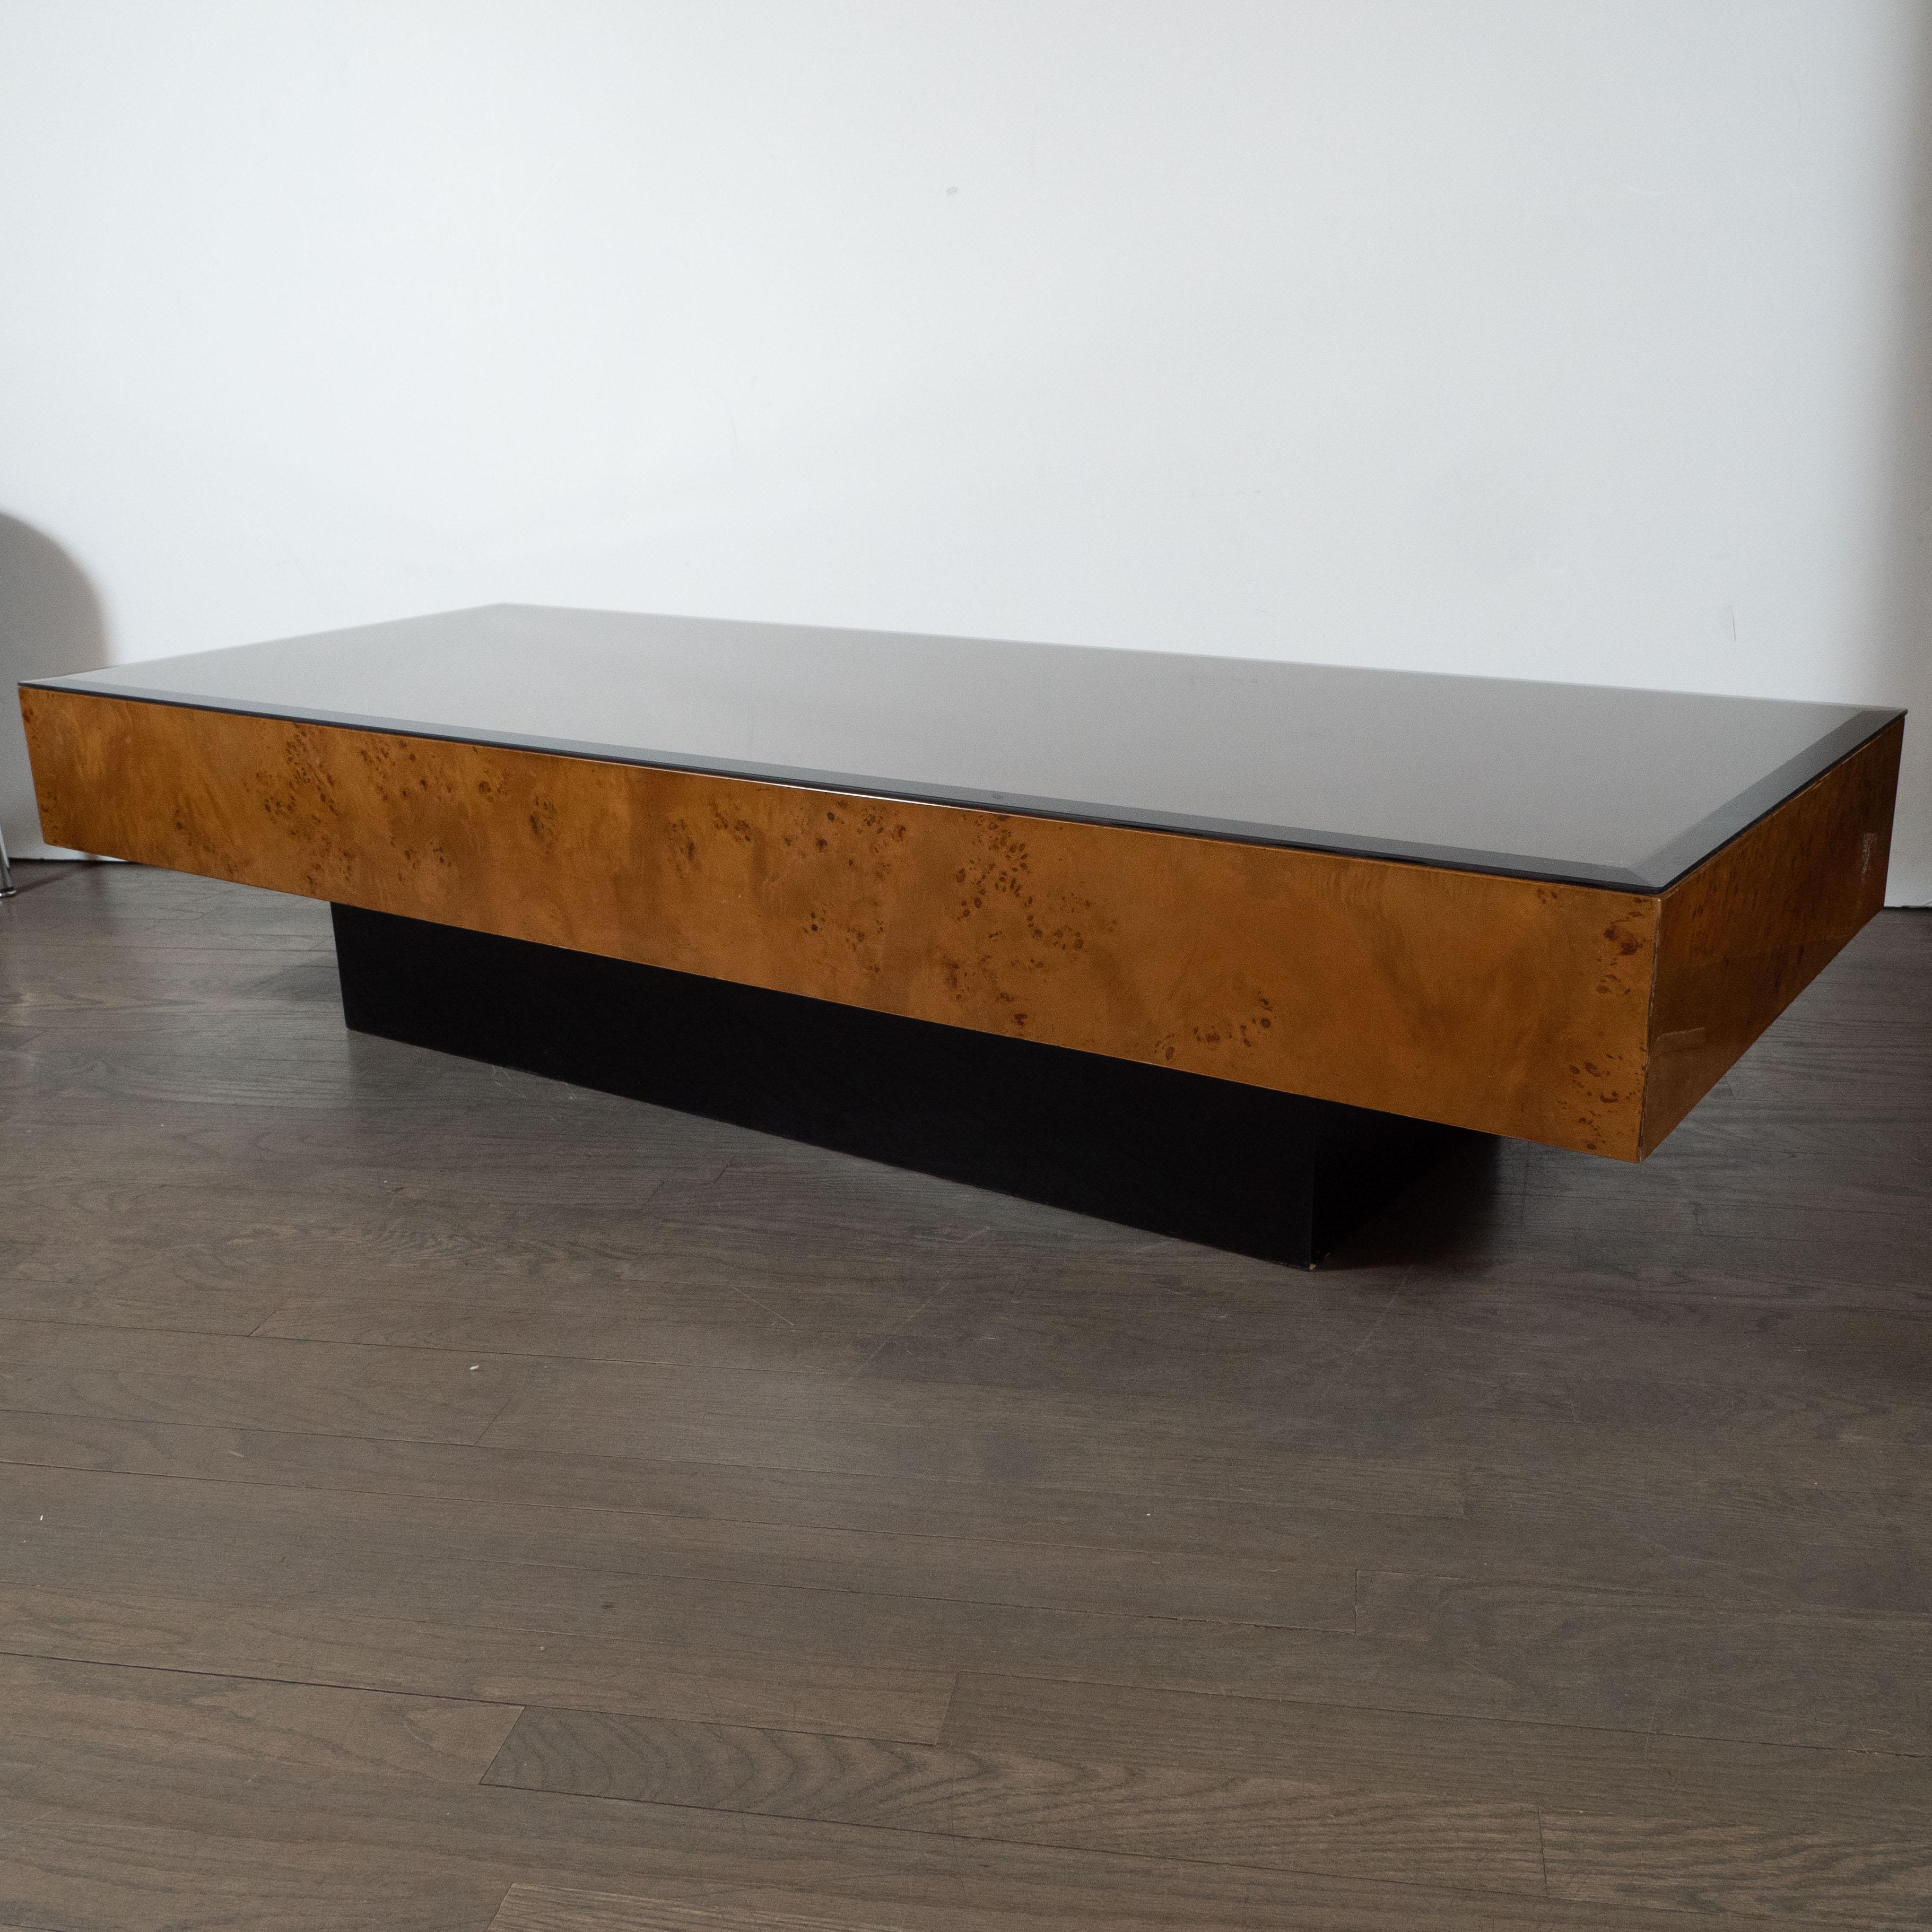 This elegant Mid-Century Modern cocktail table attributed to the esteemed Mid-Century Modern designer Milo Baughman, circa 1970. It features a volumetric rectangular top in bookmatched and burled Carpathian elm with an ebonized walnut base in the